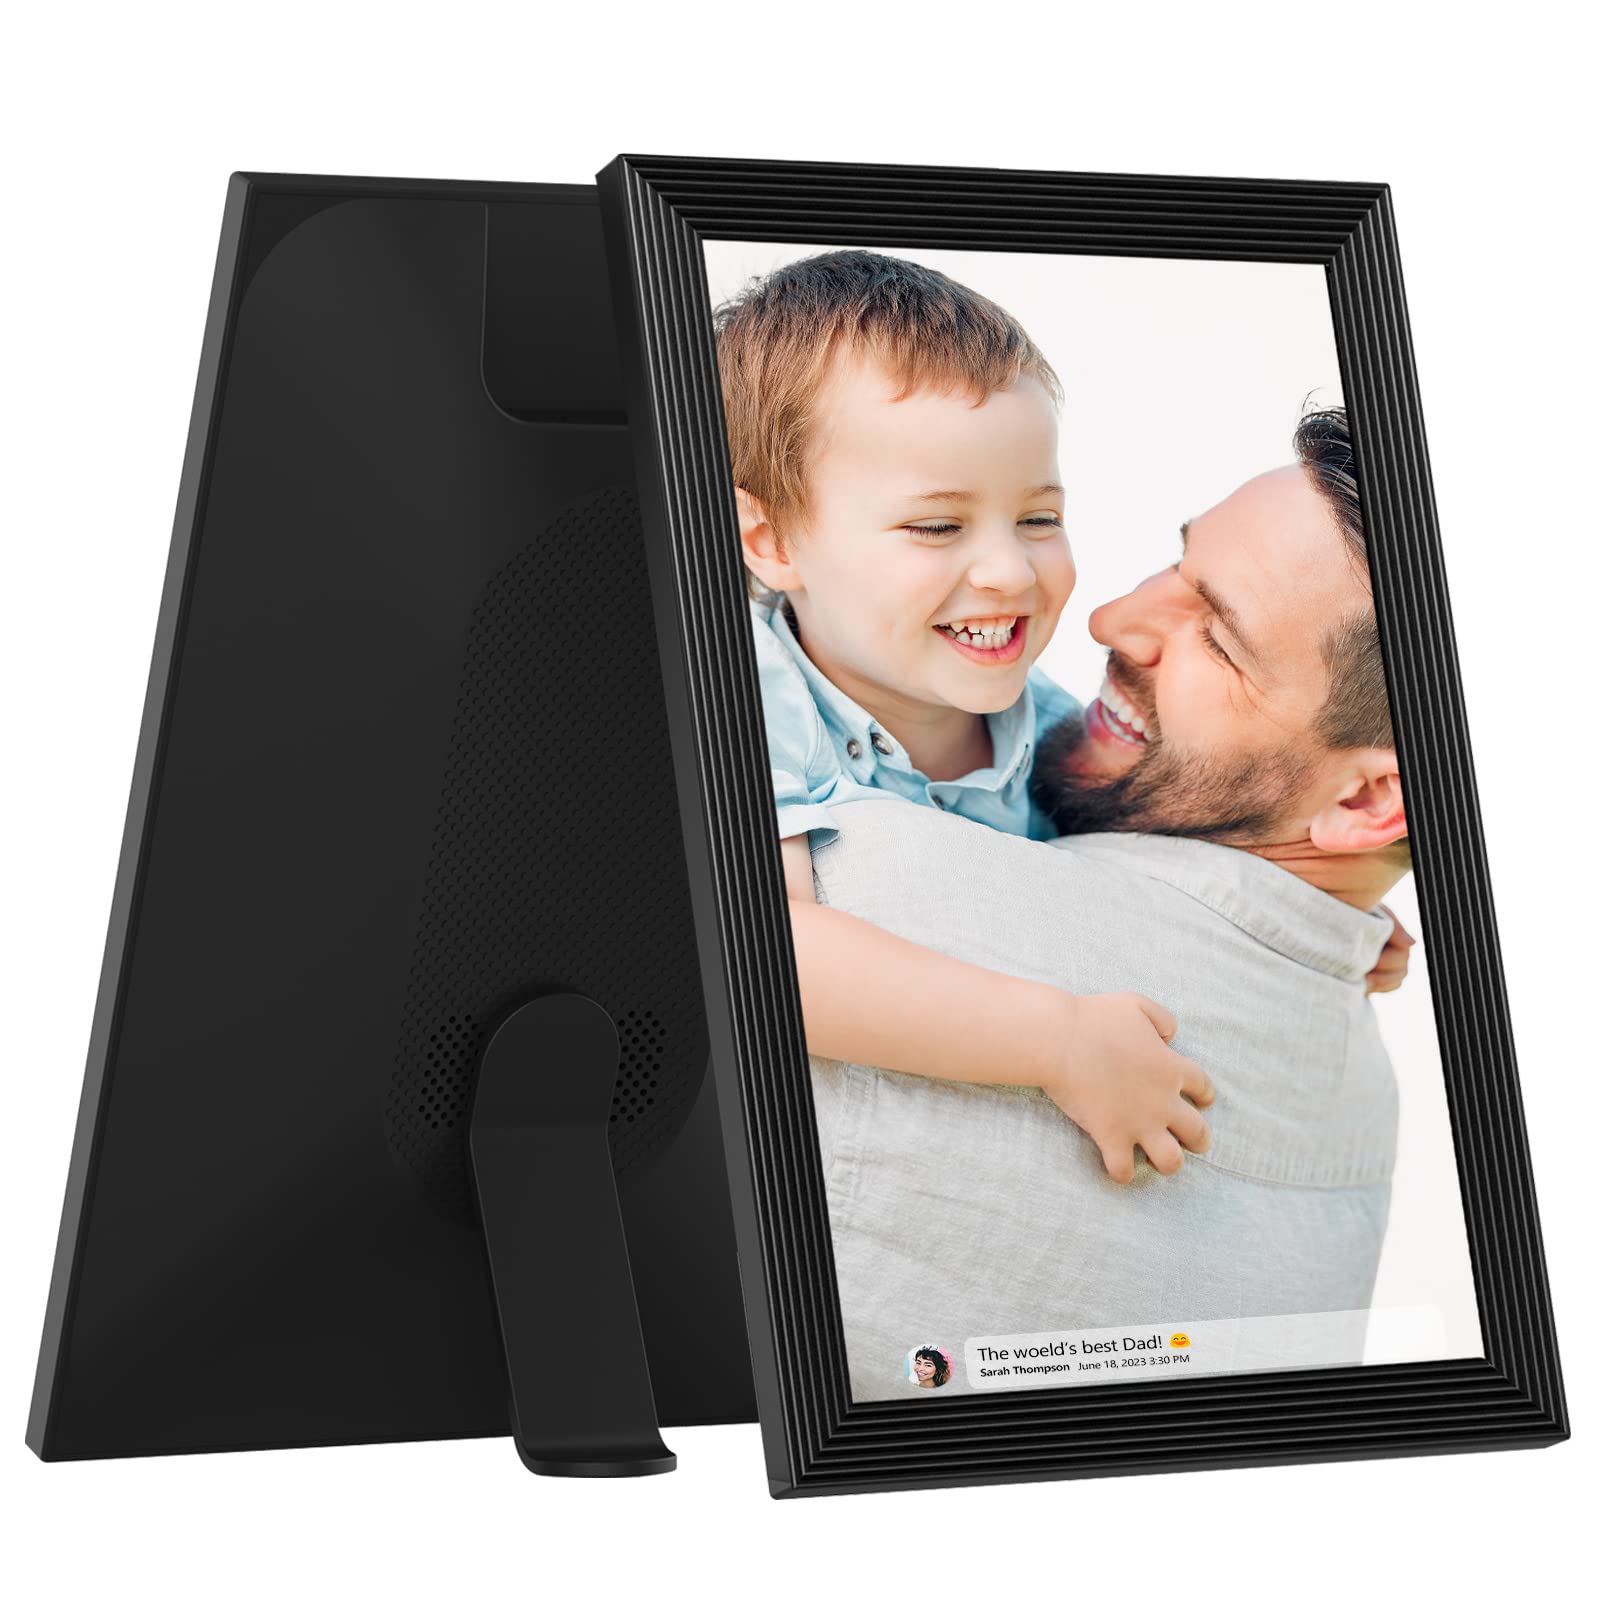 32GB FRAMEO 10.1 Inch Smart WiFi Digital Photo Frame 1280x800 IPS LCD Touch Screen, Auto-Rotate Portrait and Landscape, Share Moments Instantly via Frameo App from Anywhere